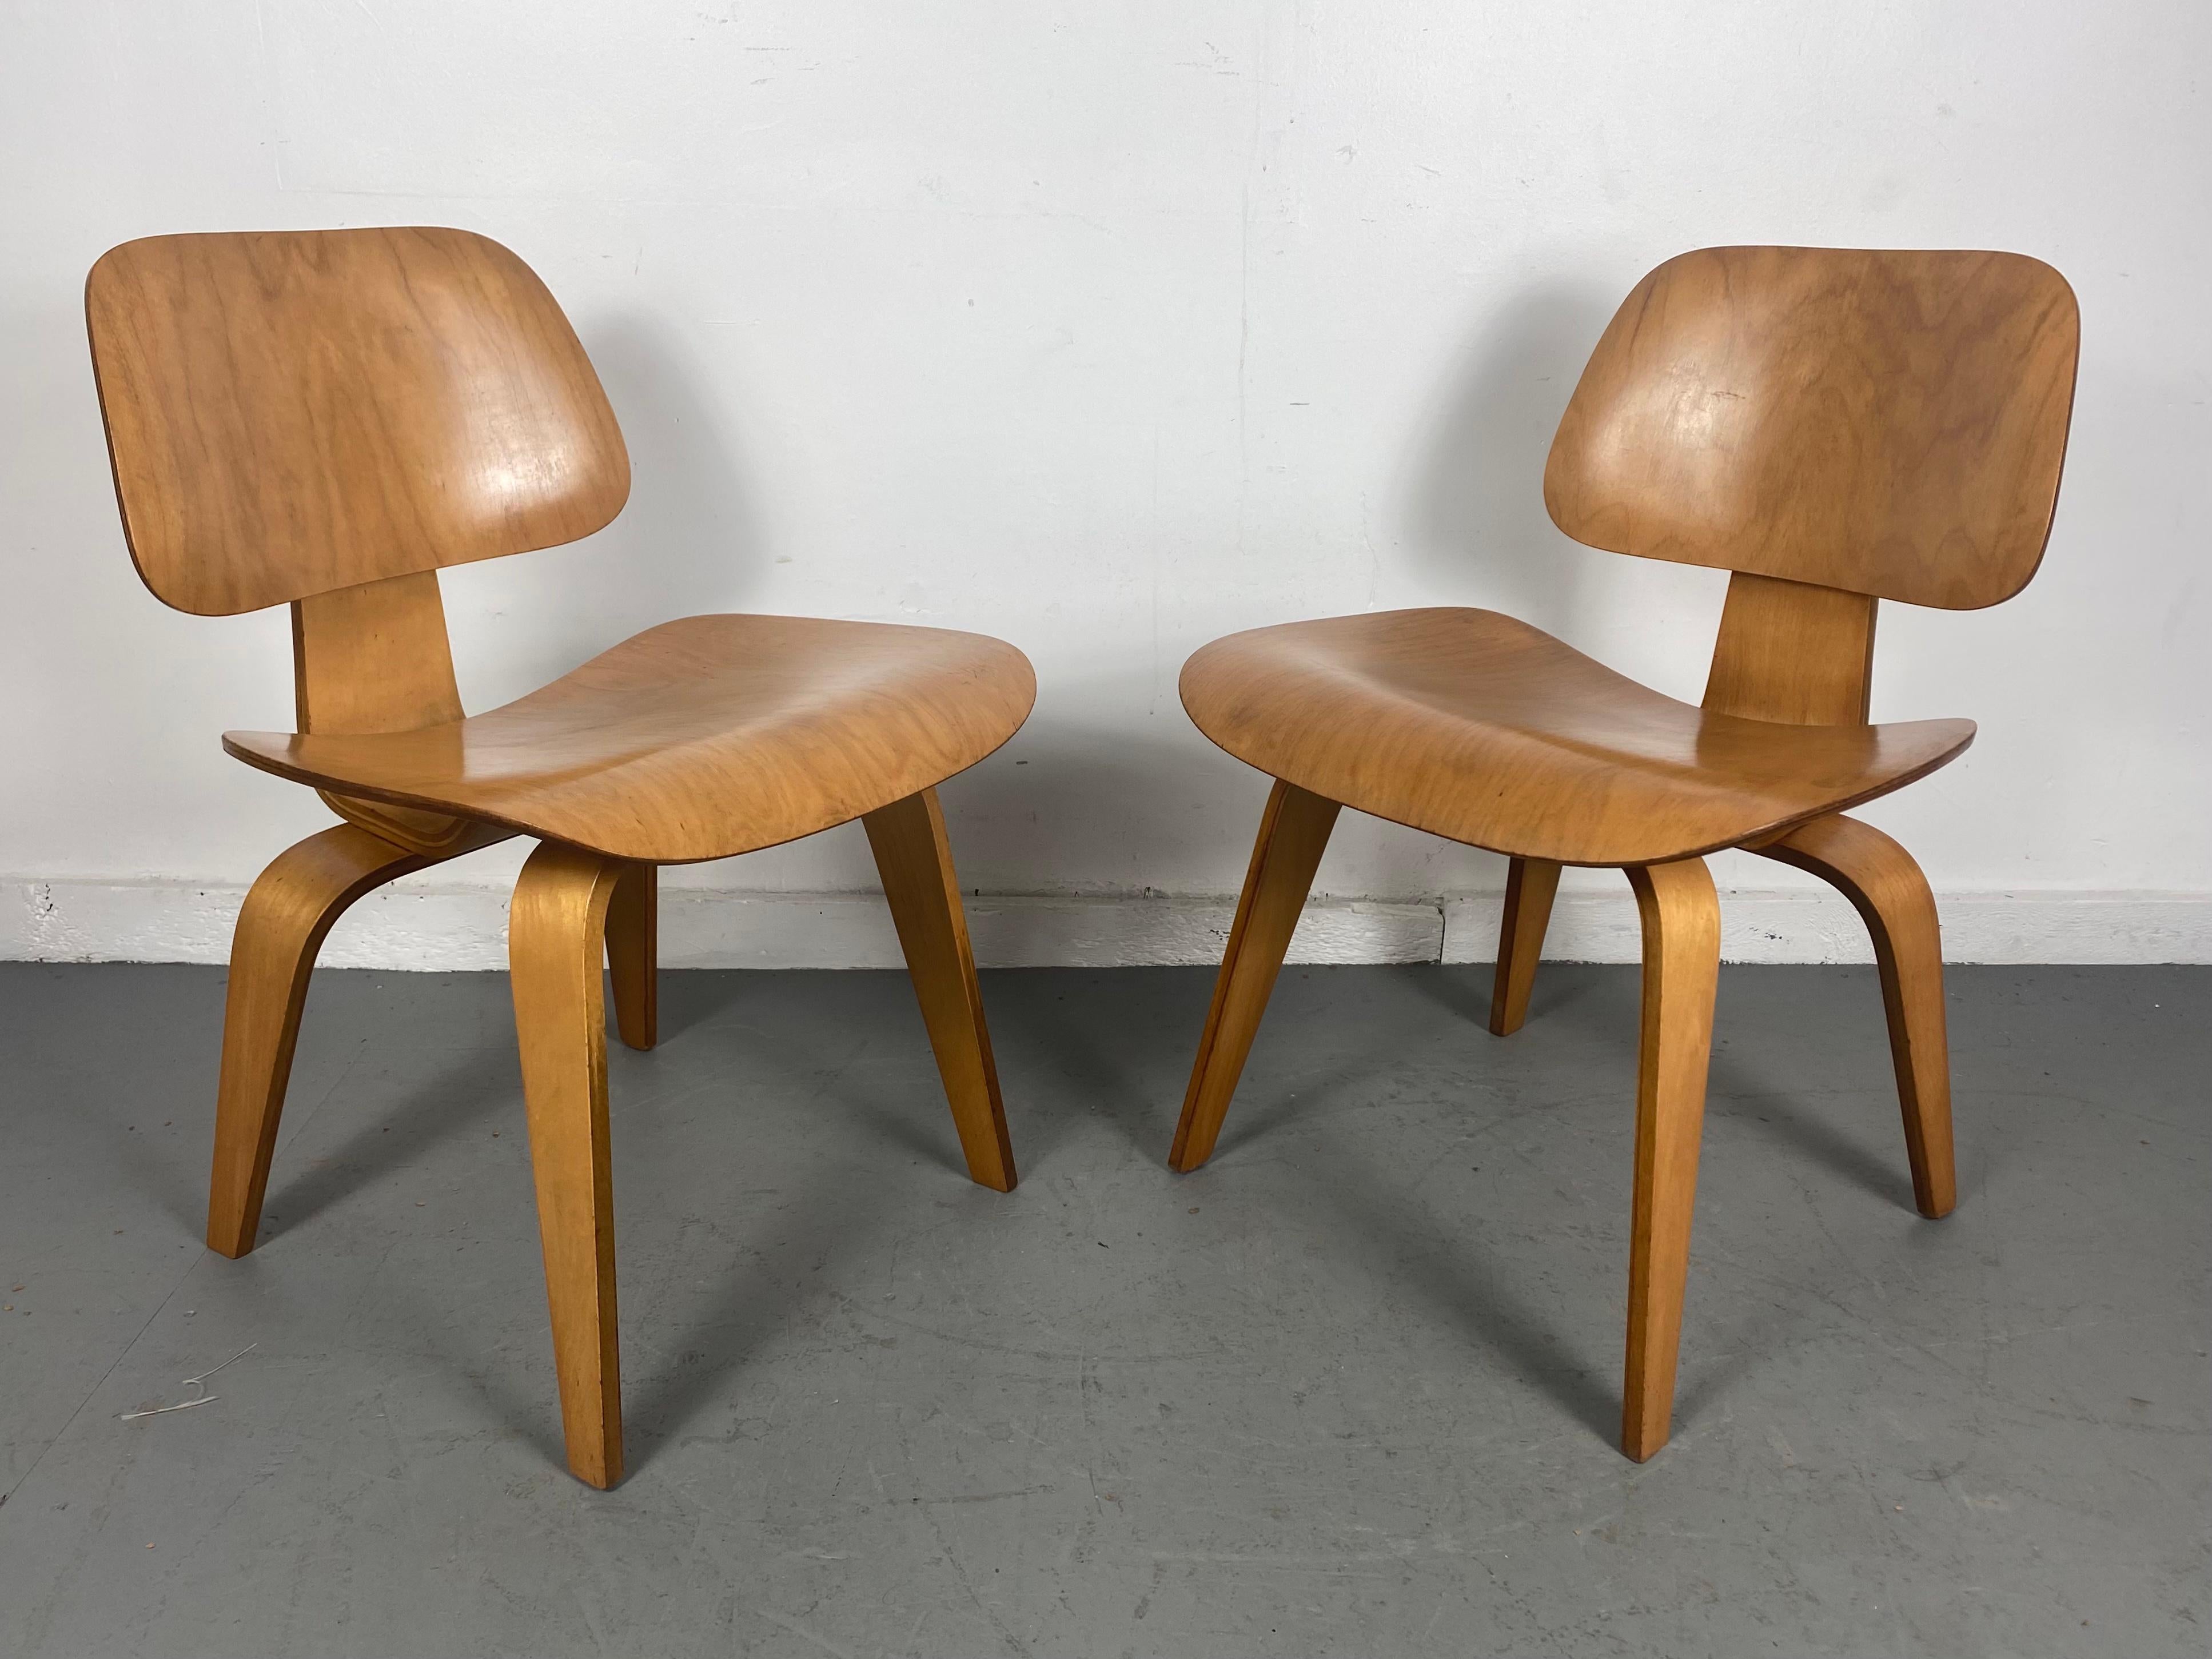 Pair Charles Eames D C W 'dining chairs' Herman Miller 2